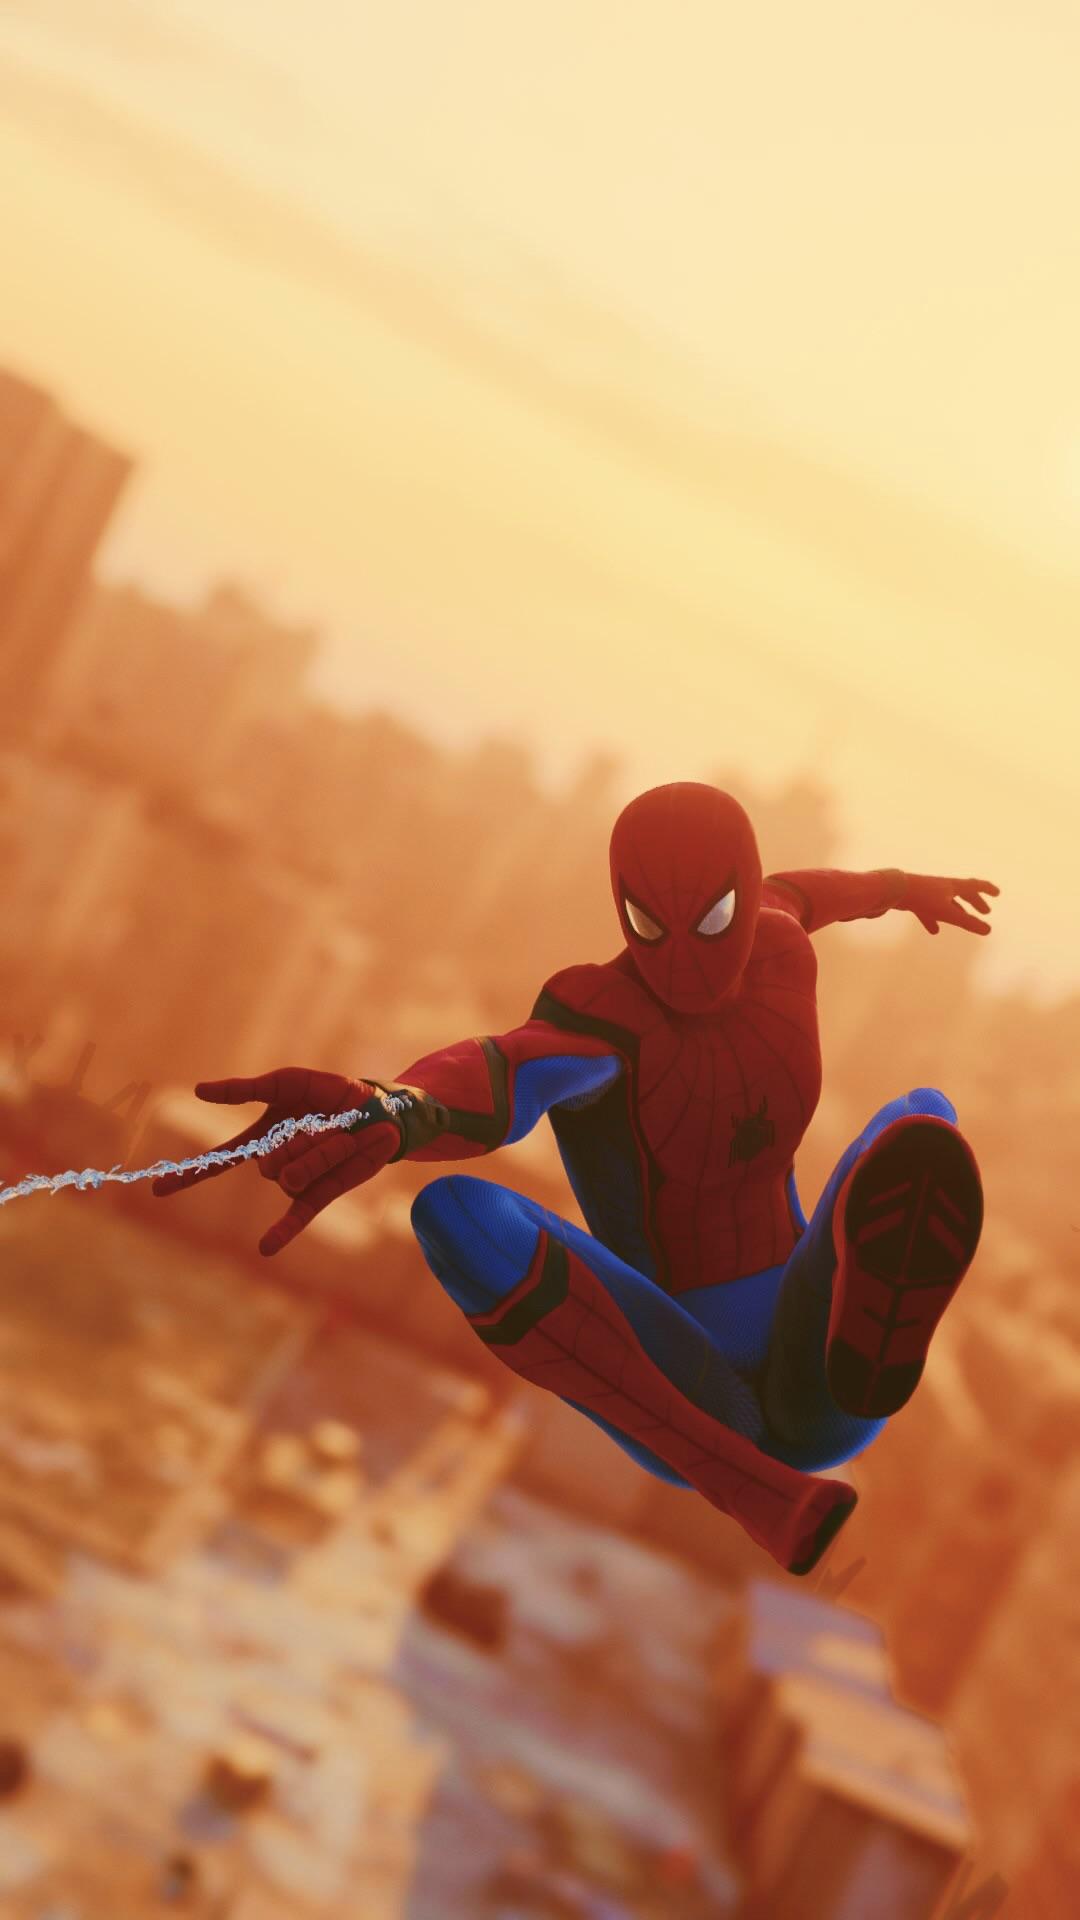 phone wallpaper version of my Sam Raimi inspired shot for anyone who would like it: SpidermanPS4